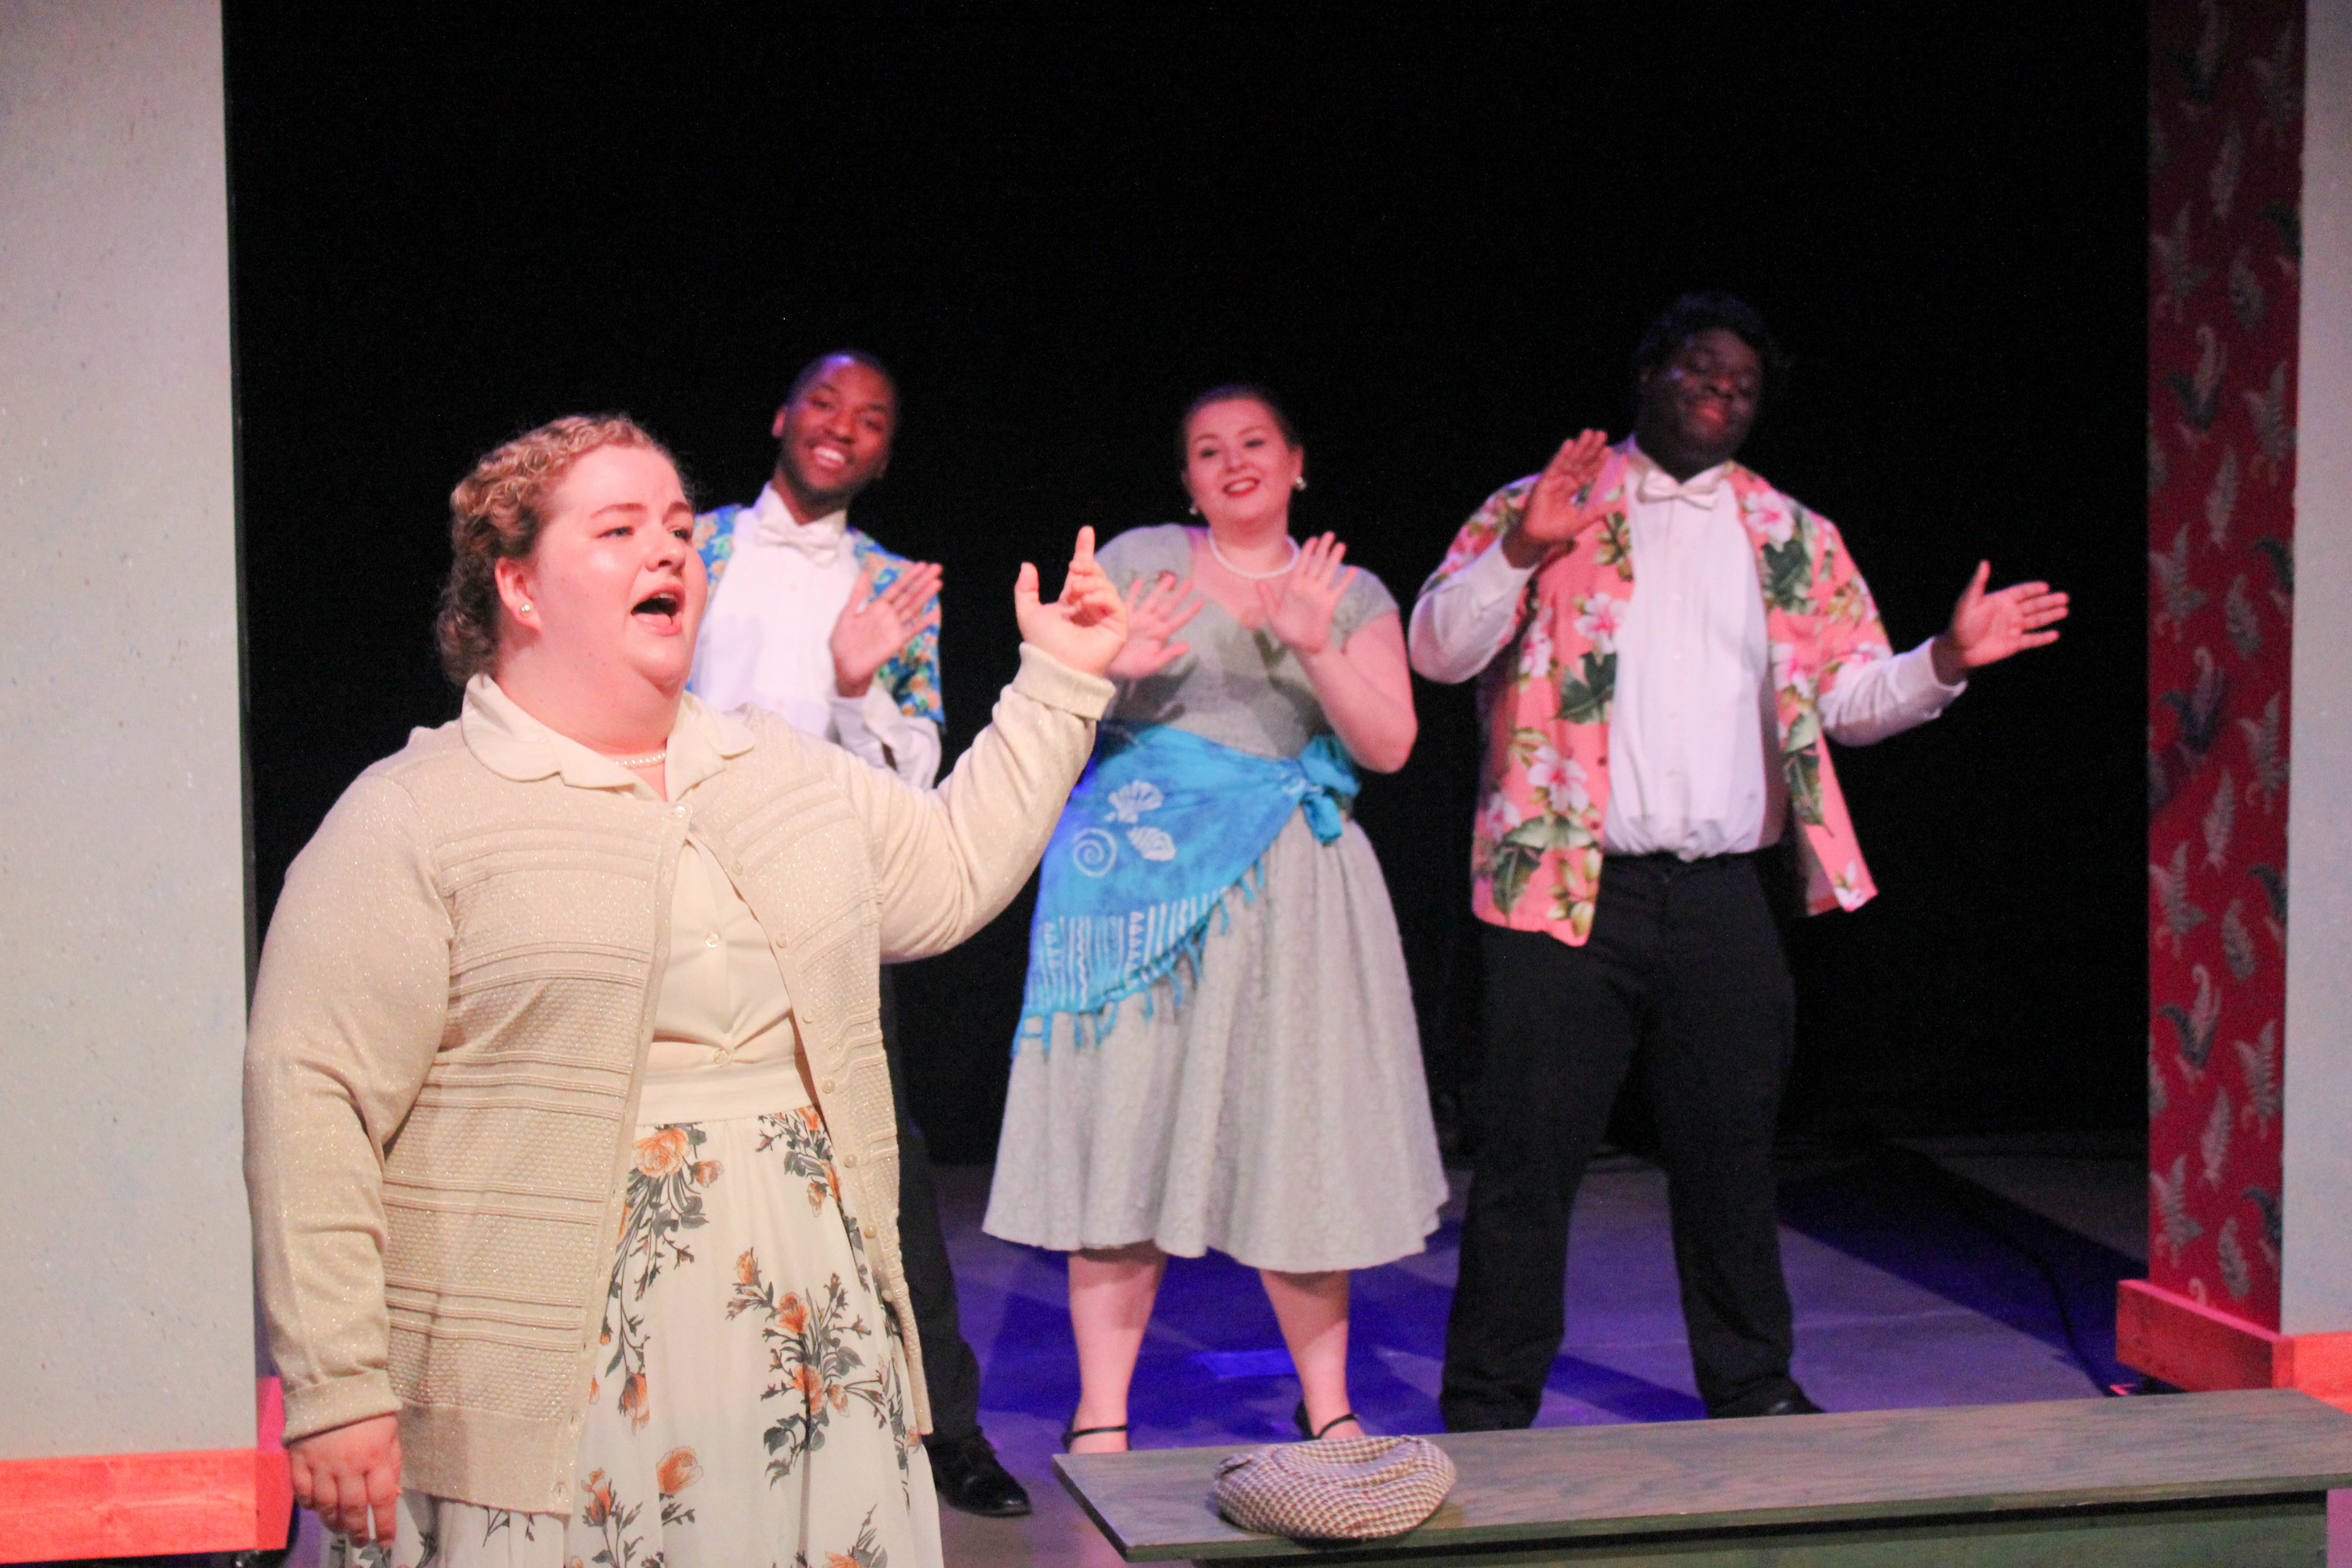 Opera Theatre breathes life into the 1950s with “American Dreamers”